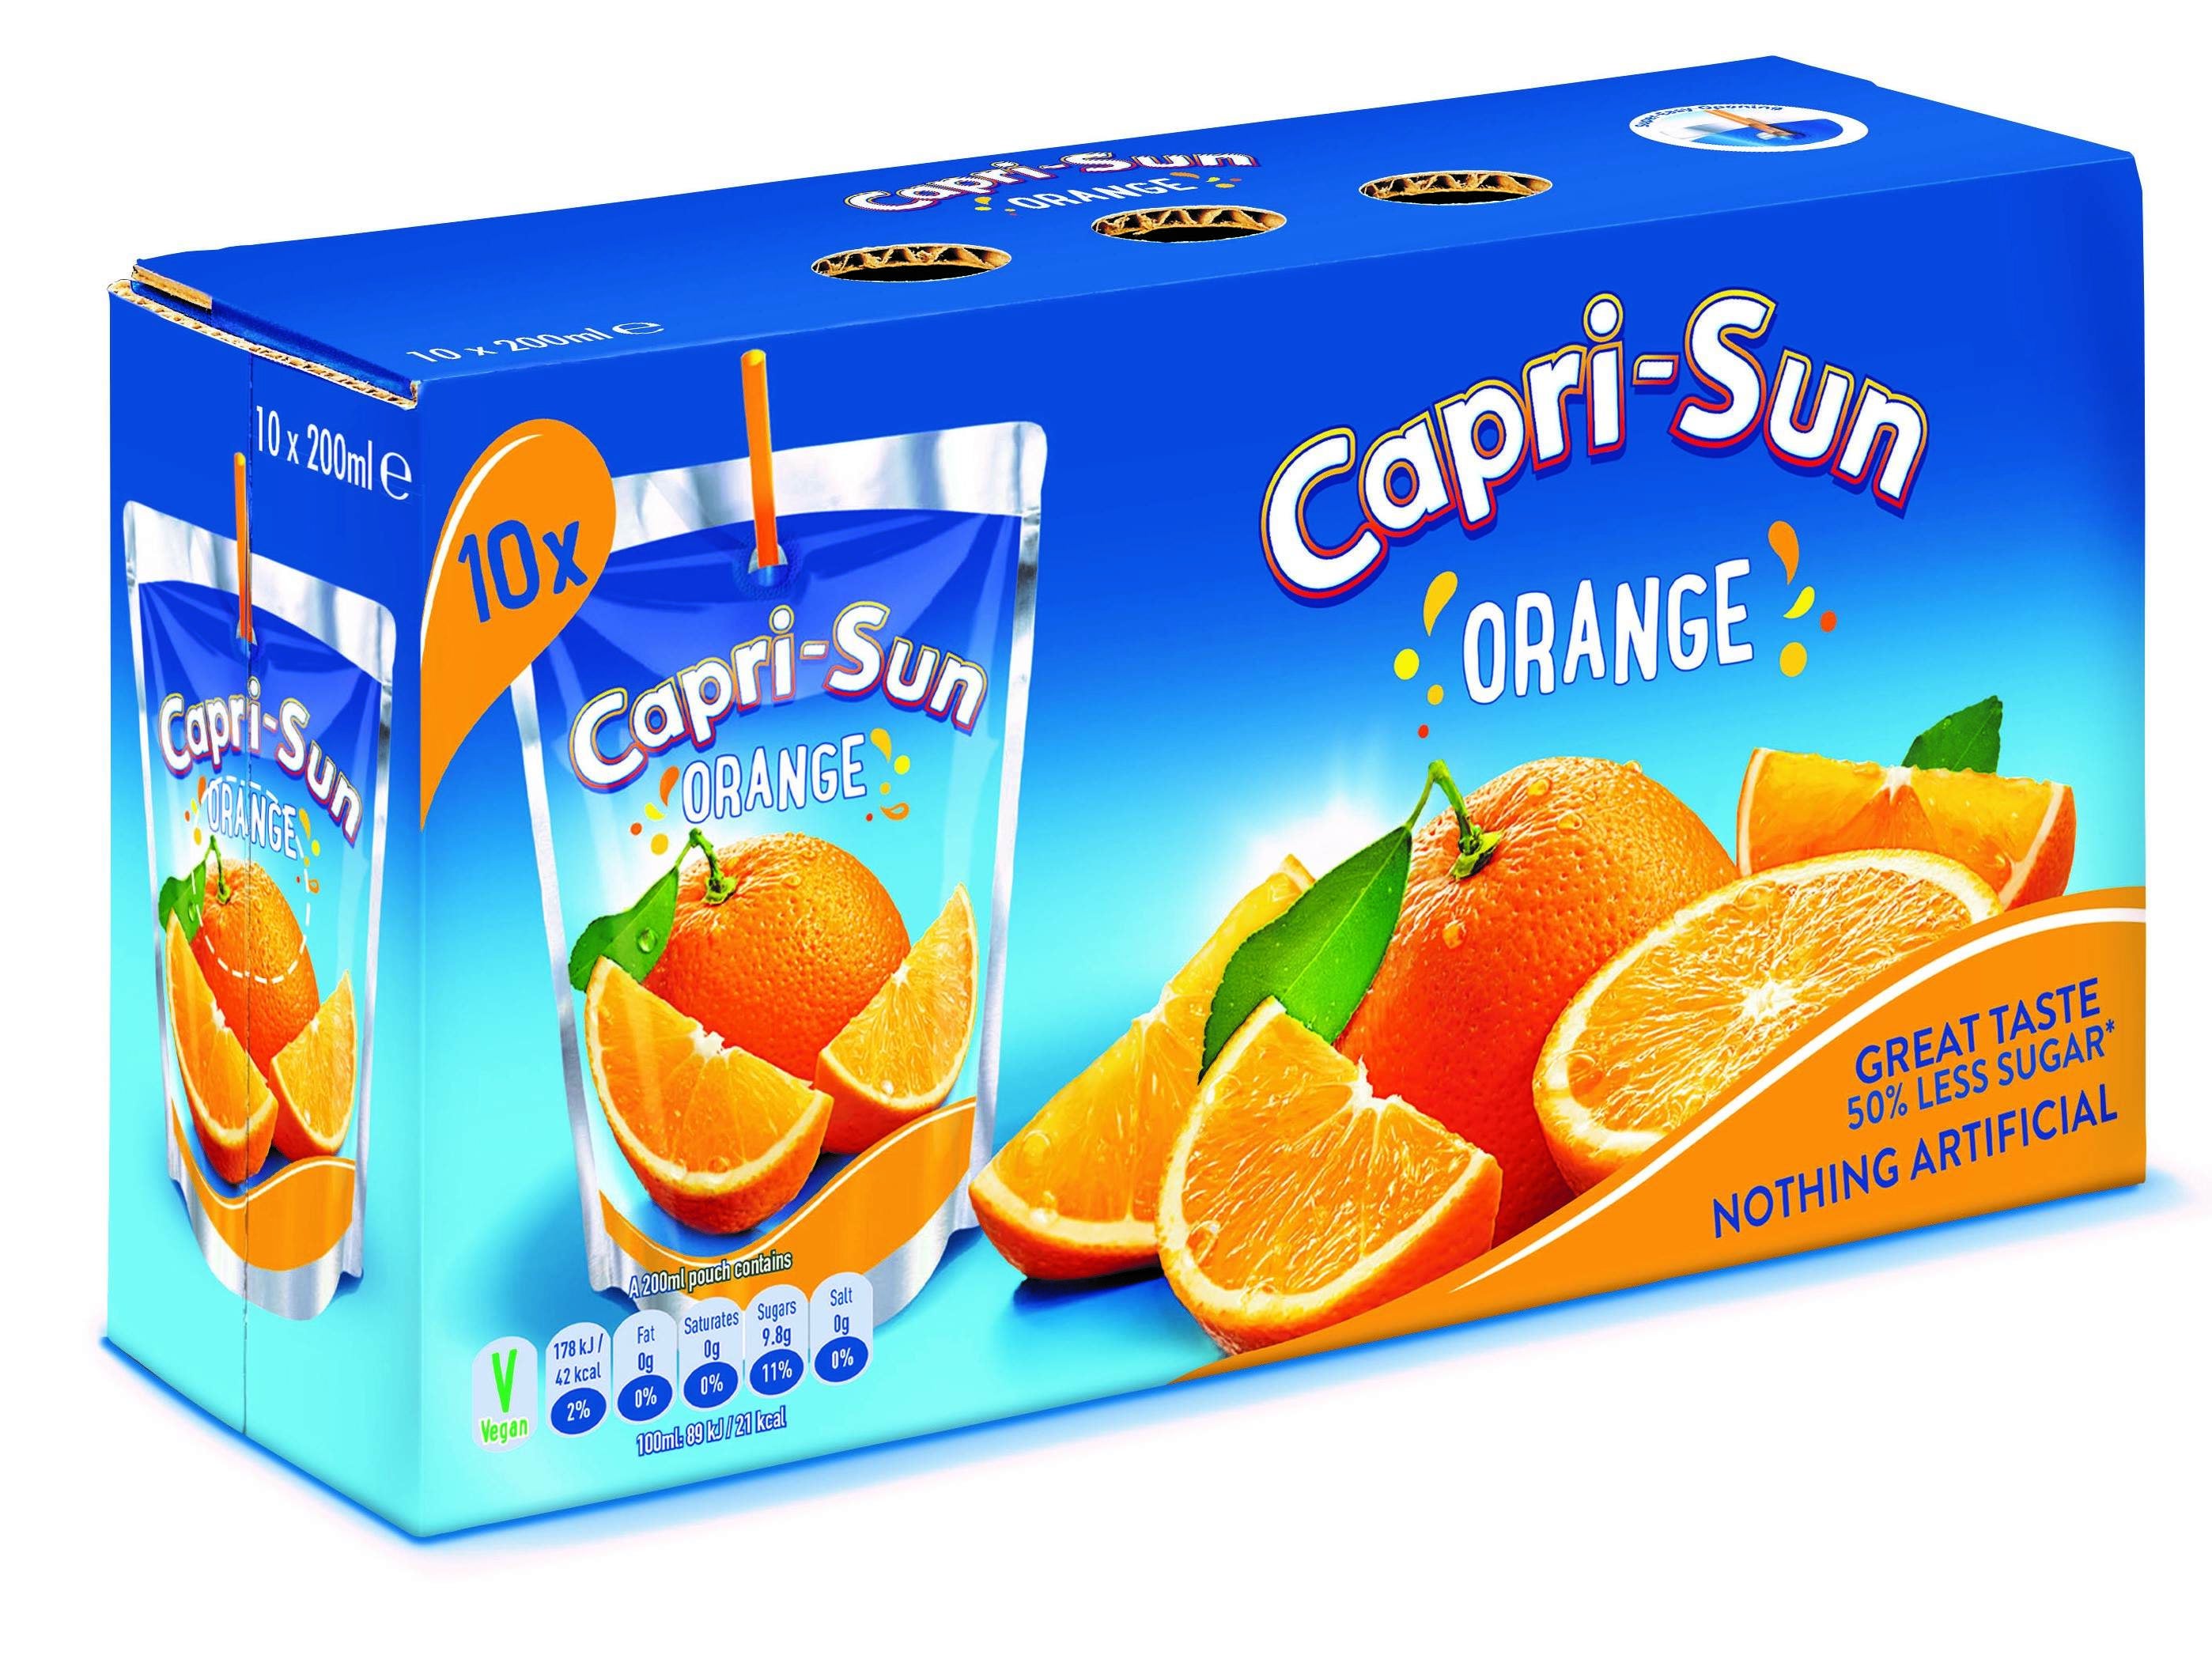 CCEP has cut the sugar content in its Capri-Sun fruit drinks by 50% to